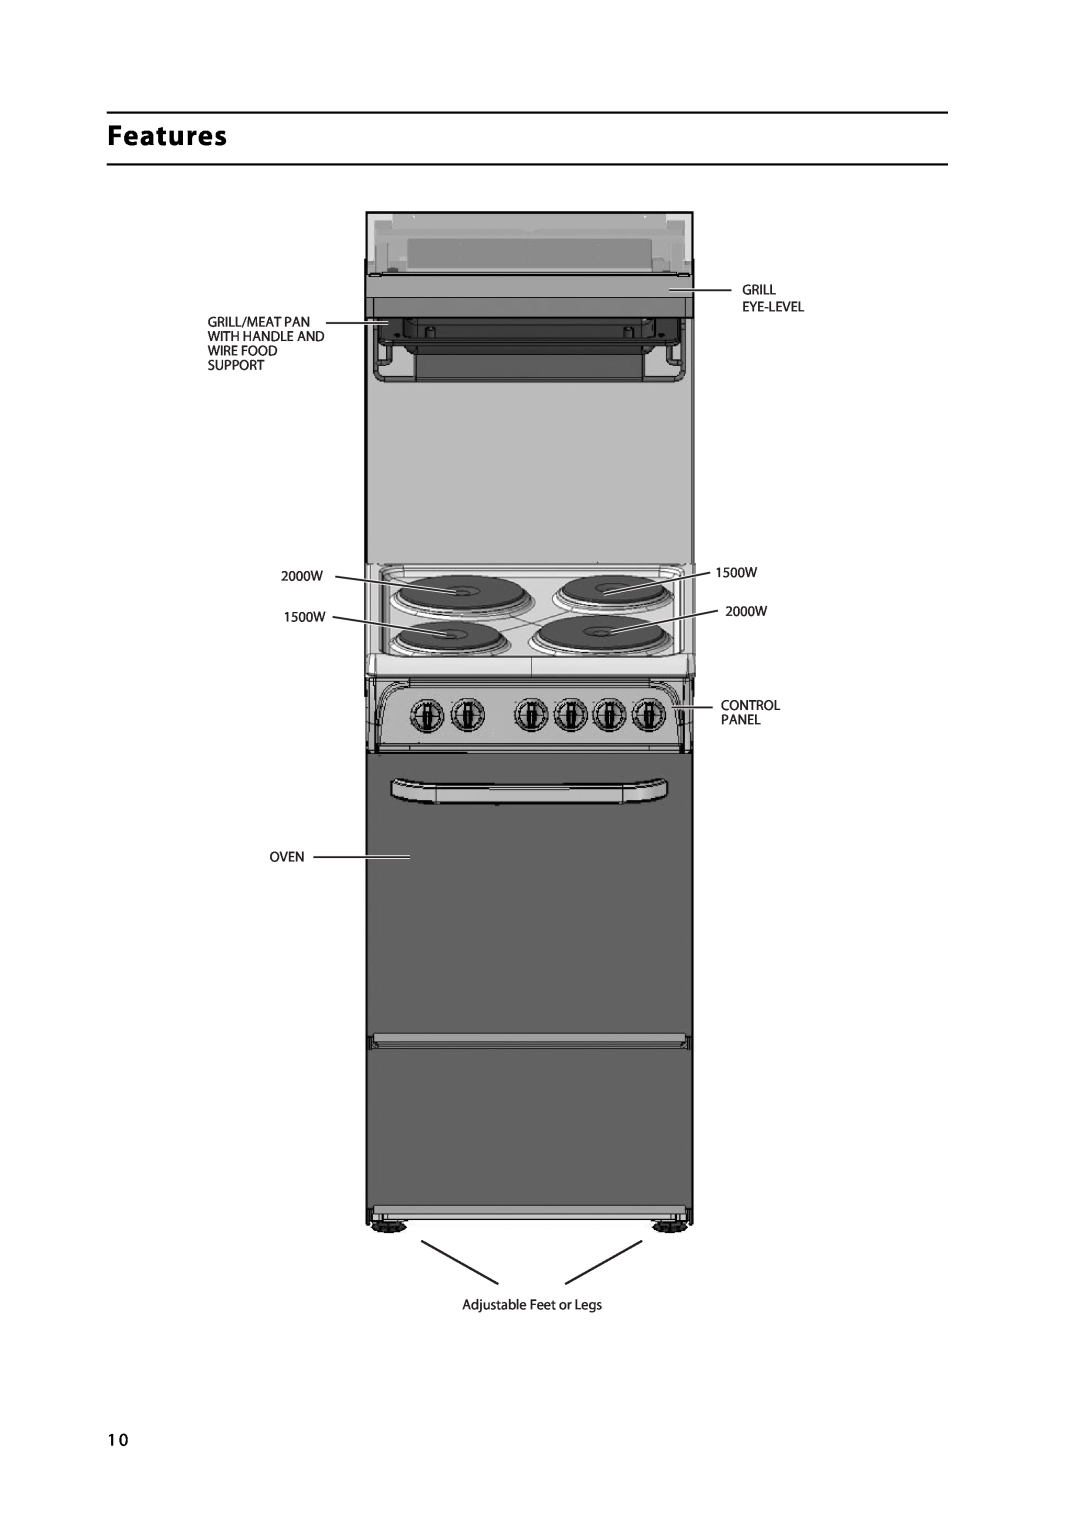 Hotpoint HL500E manual Features, Grill/Meat Pan With Handle And Wire Food Support, 2000W 1500W, Grill Eye-Level 